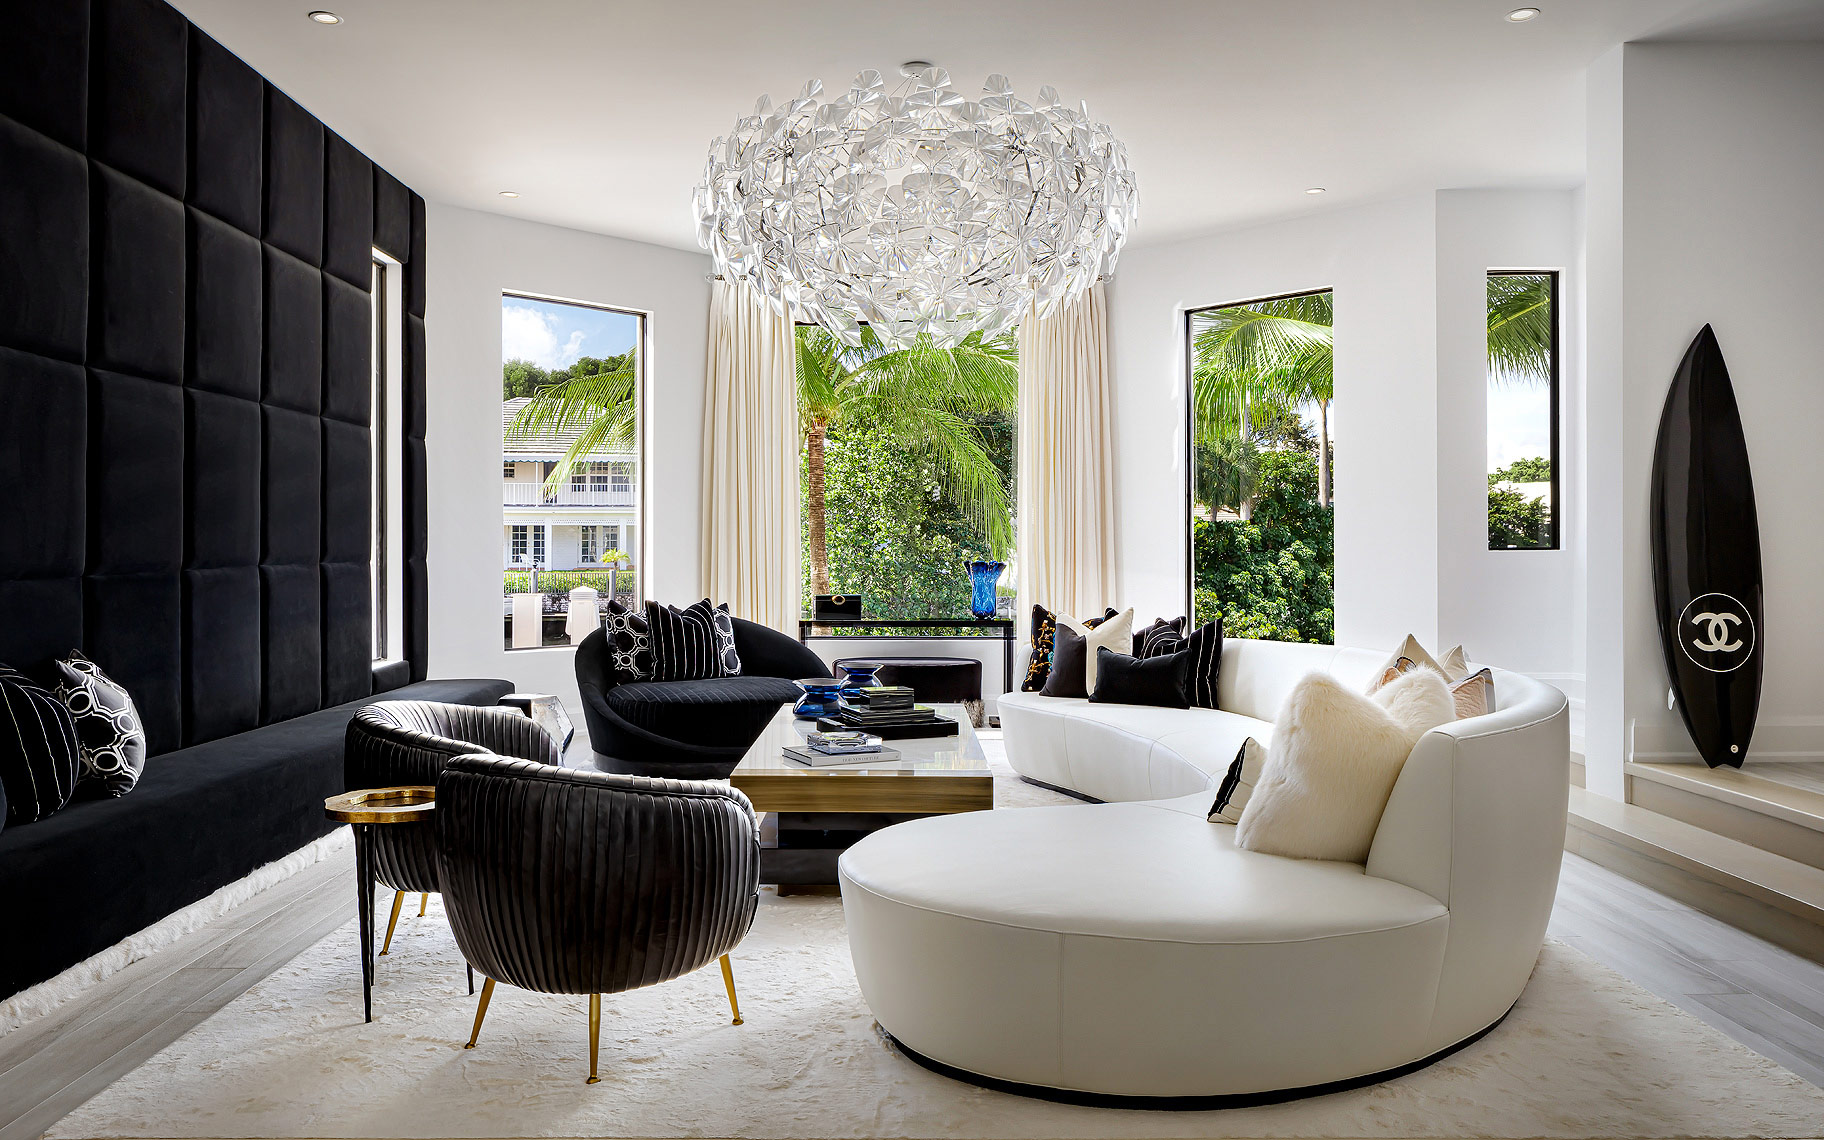 Lionel Messi Fort Lauderdale Home - designed by Lori Morris